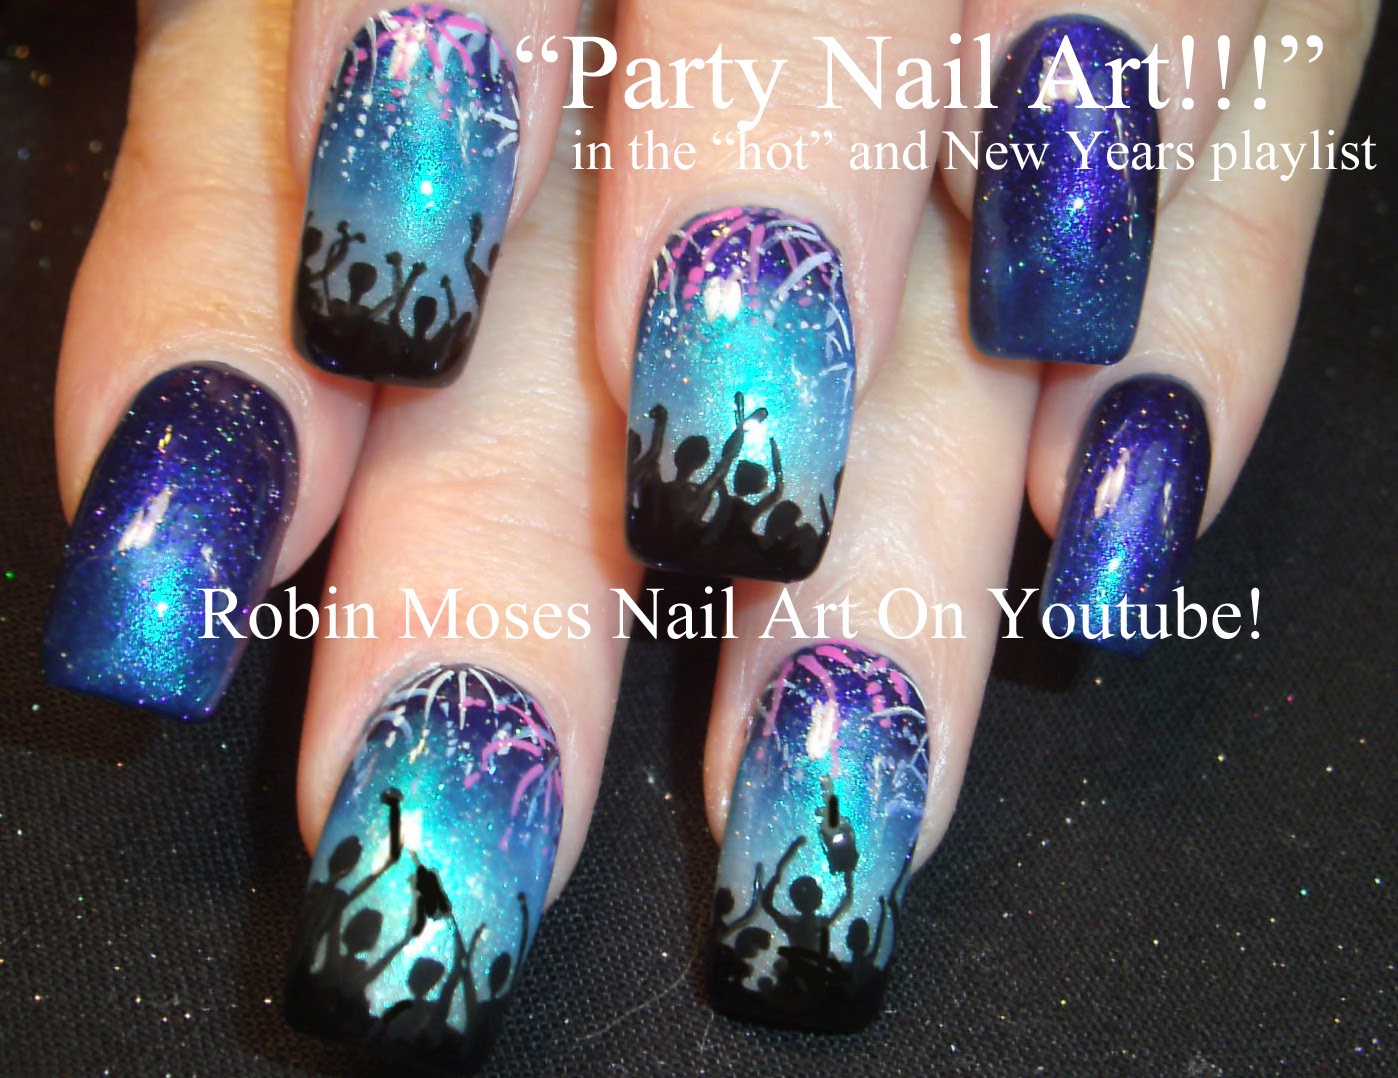 4. Stiletto Party Nails - wide 5